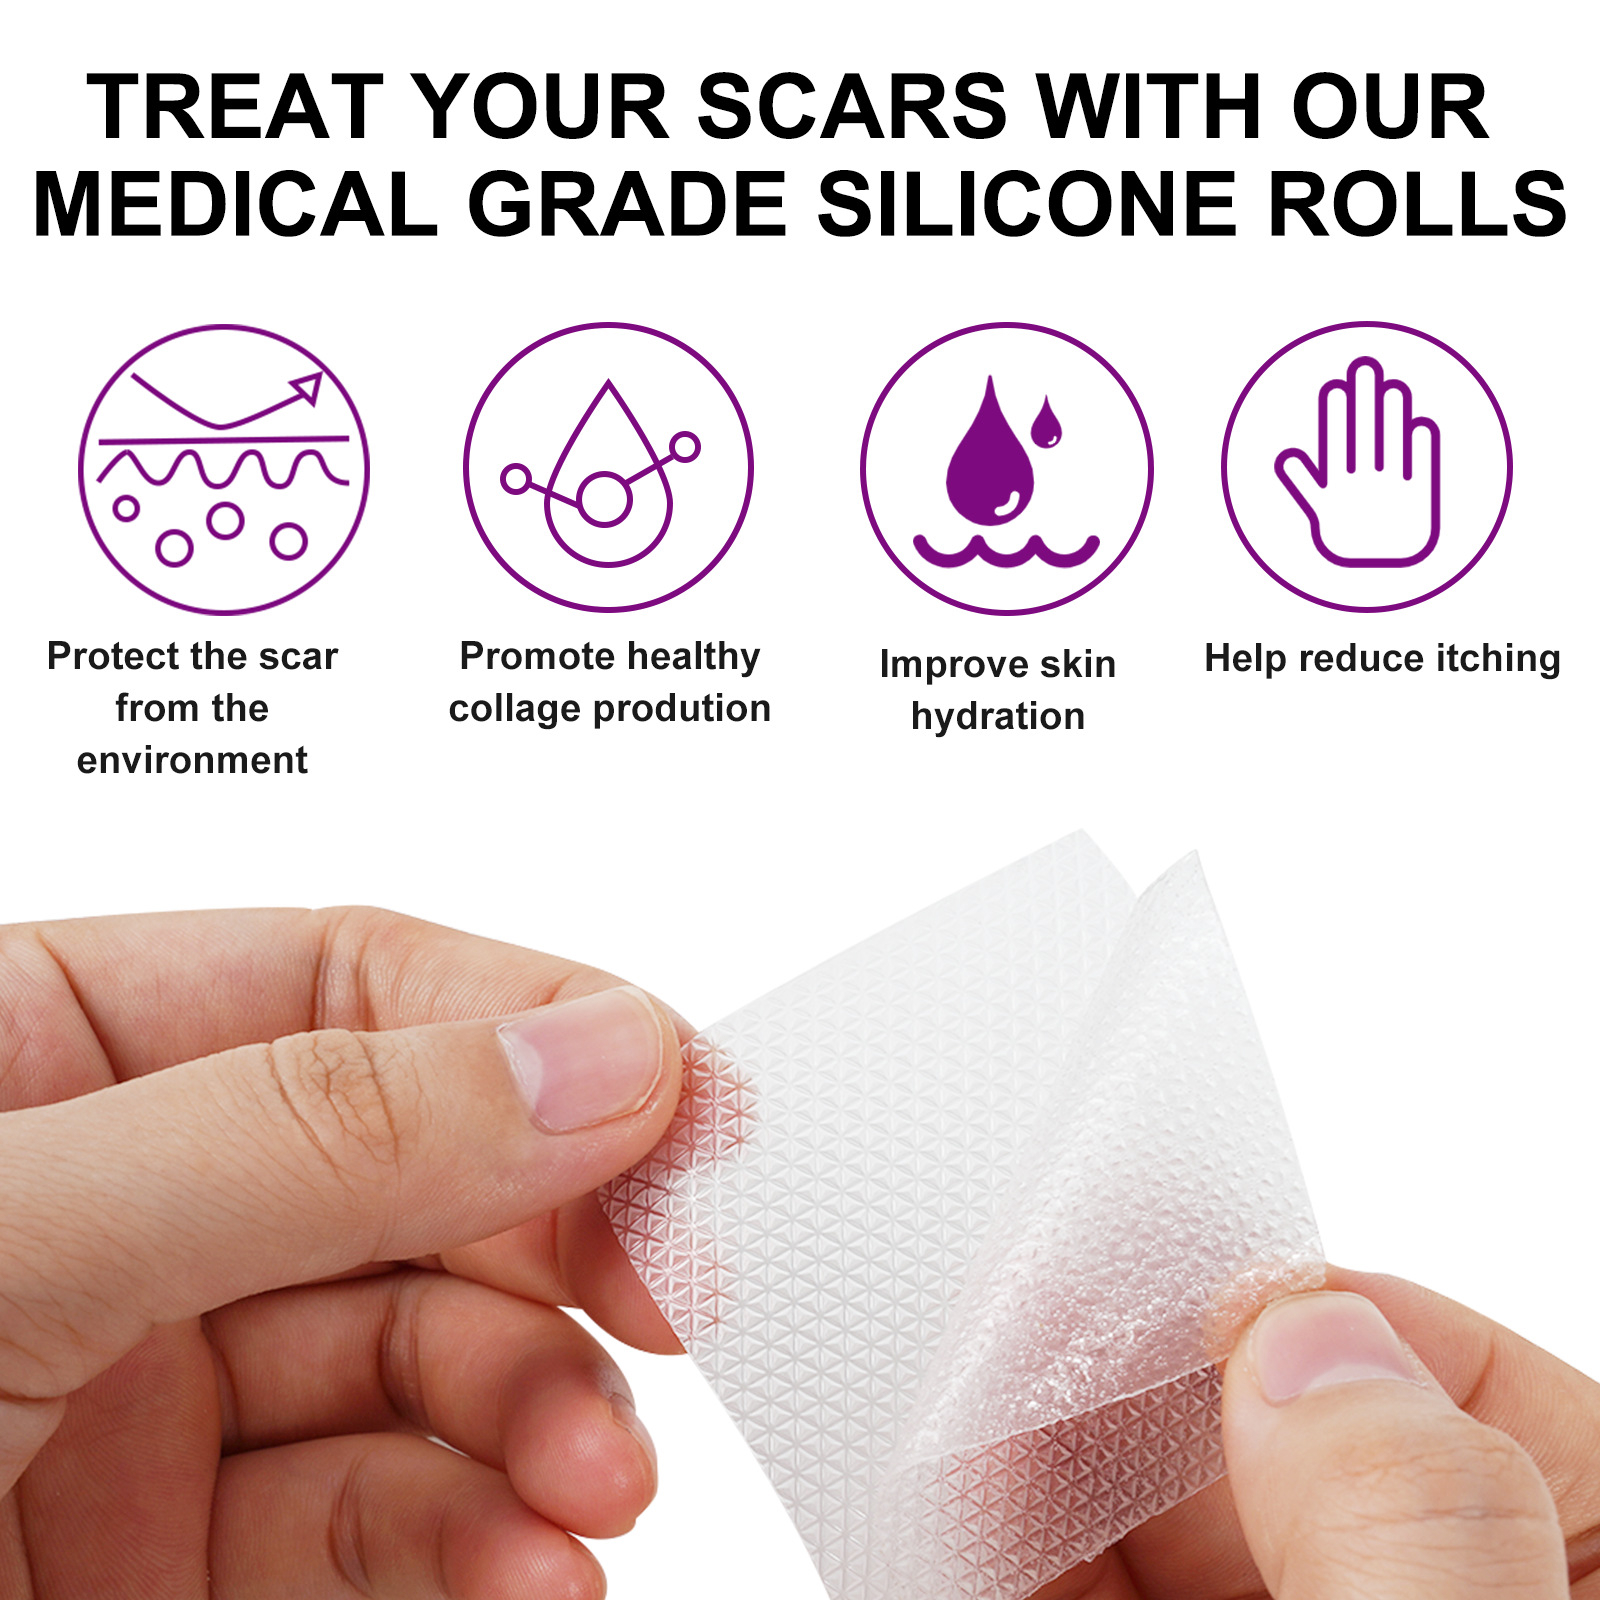 1.5 m Silicone Scar Sheets Gel Tape Roll Scars Removal Skin Treatment Repair Wound Burn Efficient Patch Tapes C-Section, Surgery, Burn, Keloid, Acne